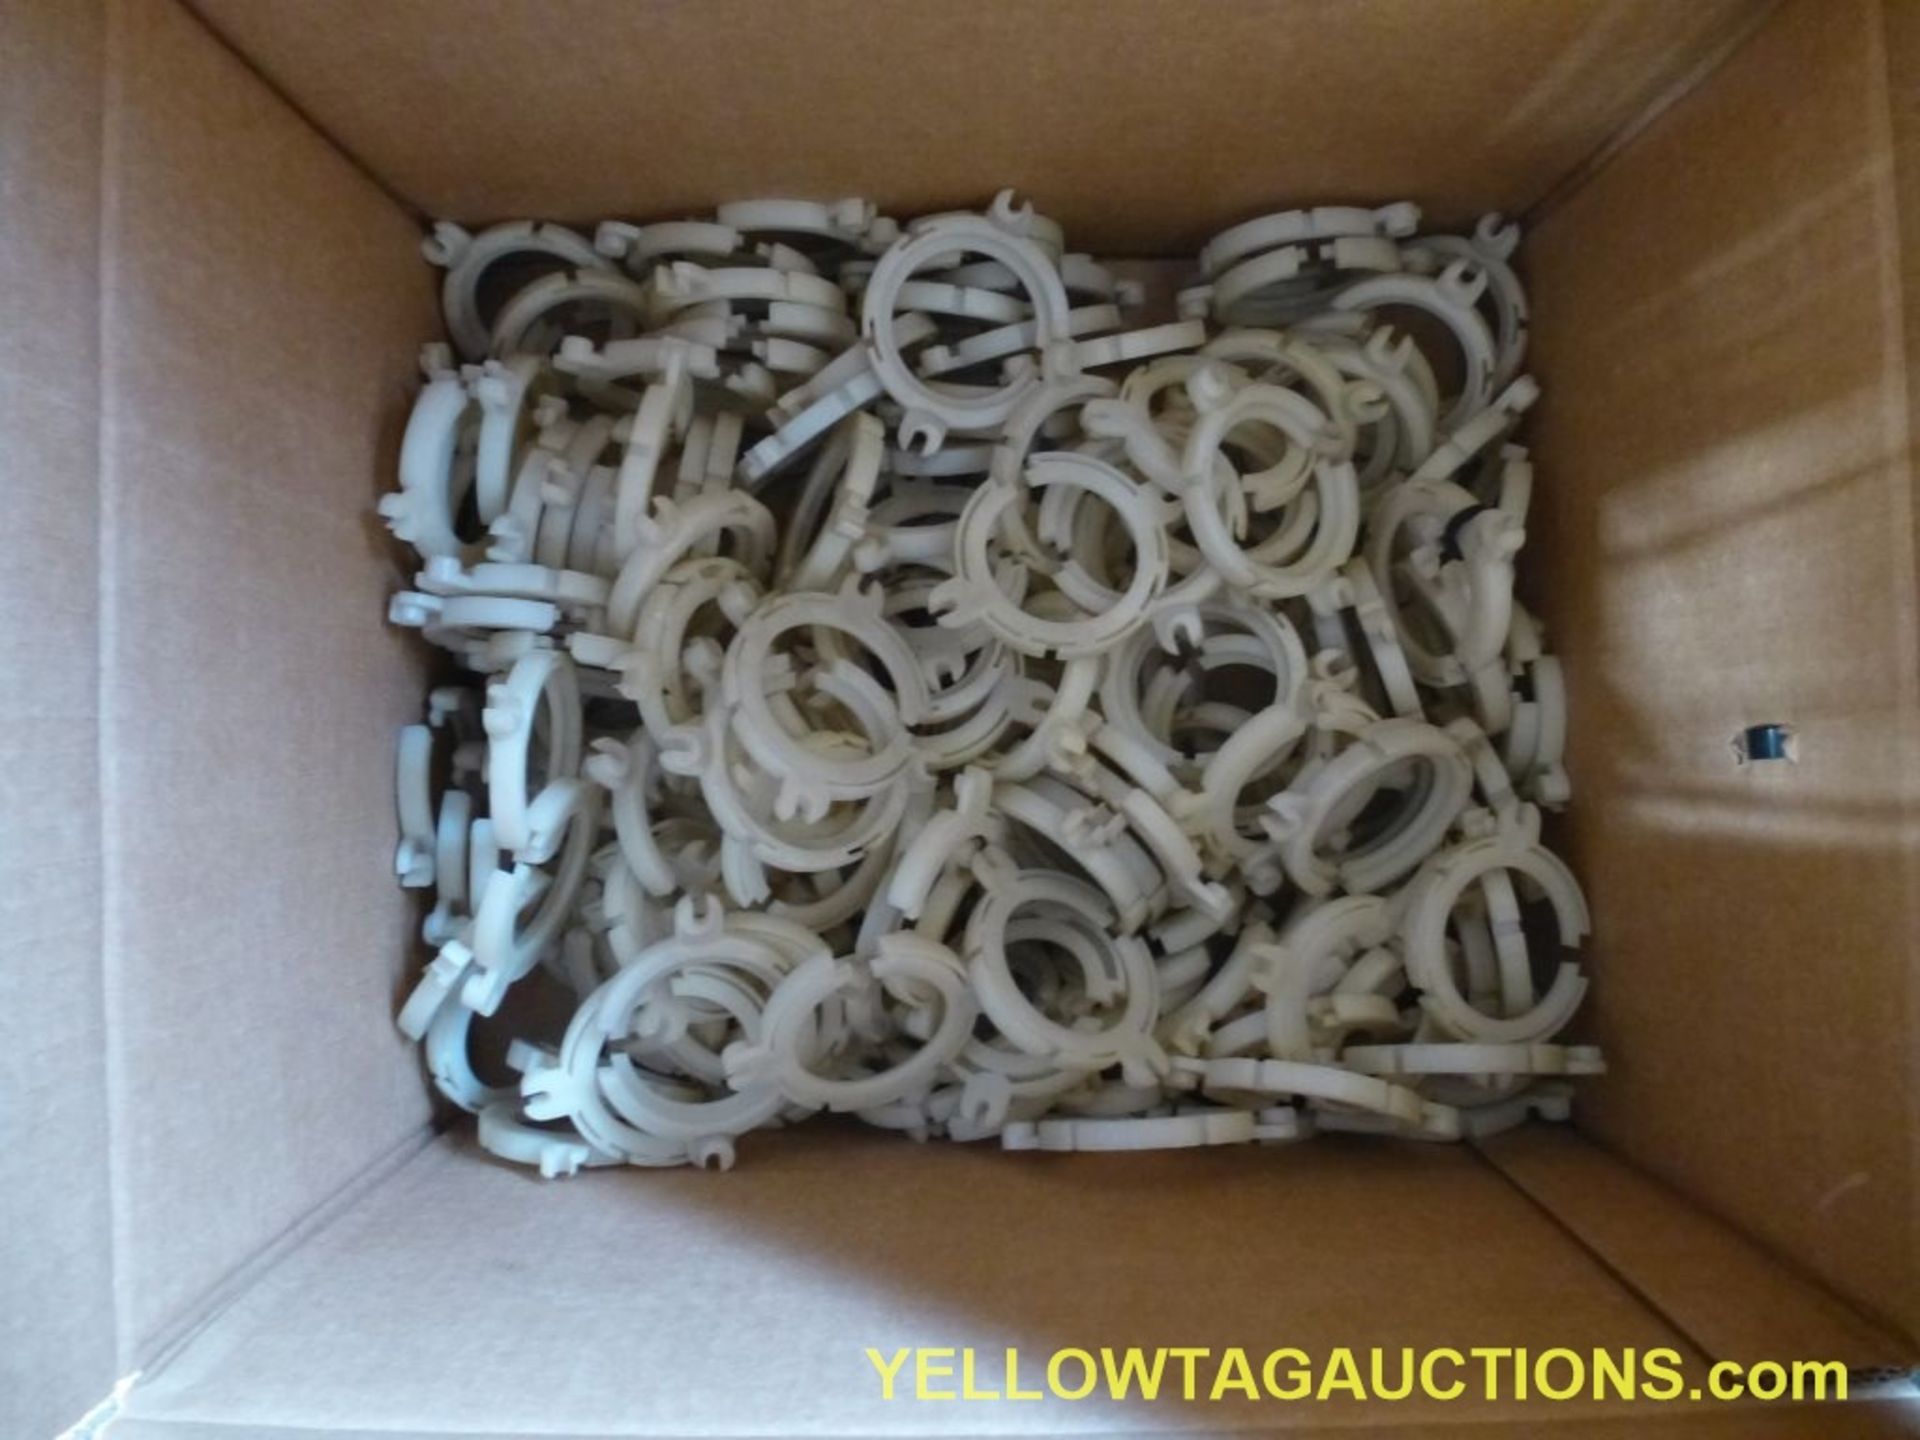 Lot of Approx. (1,000) Drive Shaft Safety Shield Retainer Clips|Tag: 1261 - Image 2 of 10